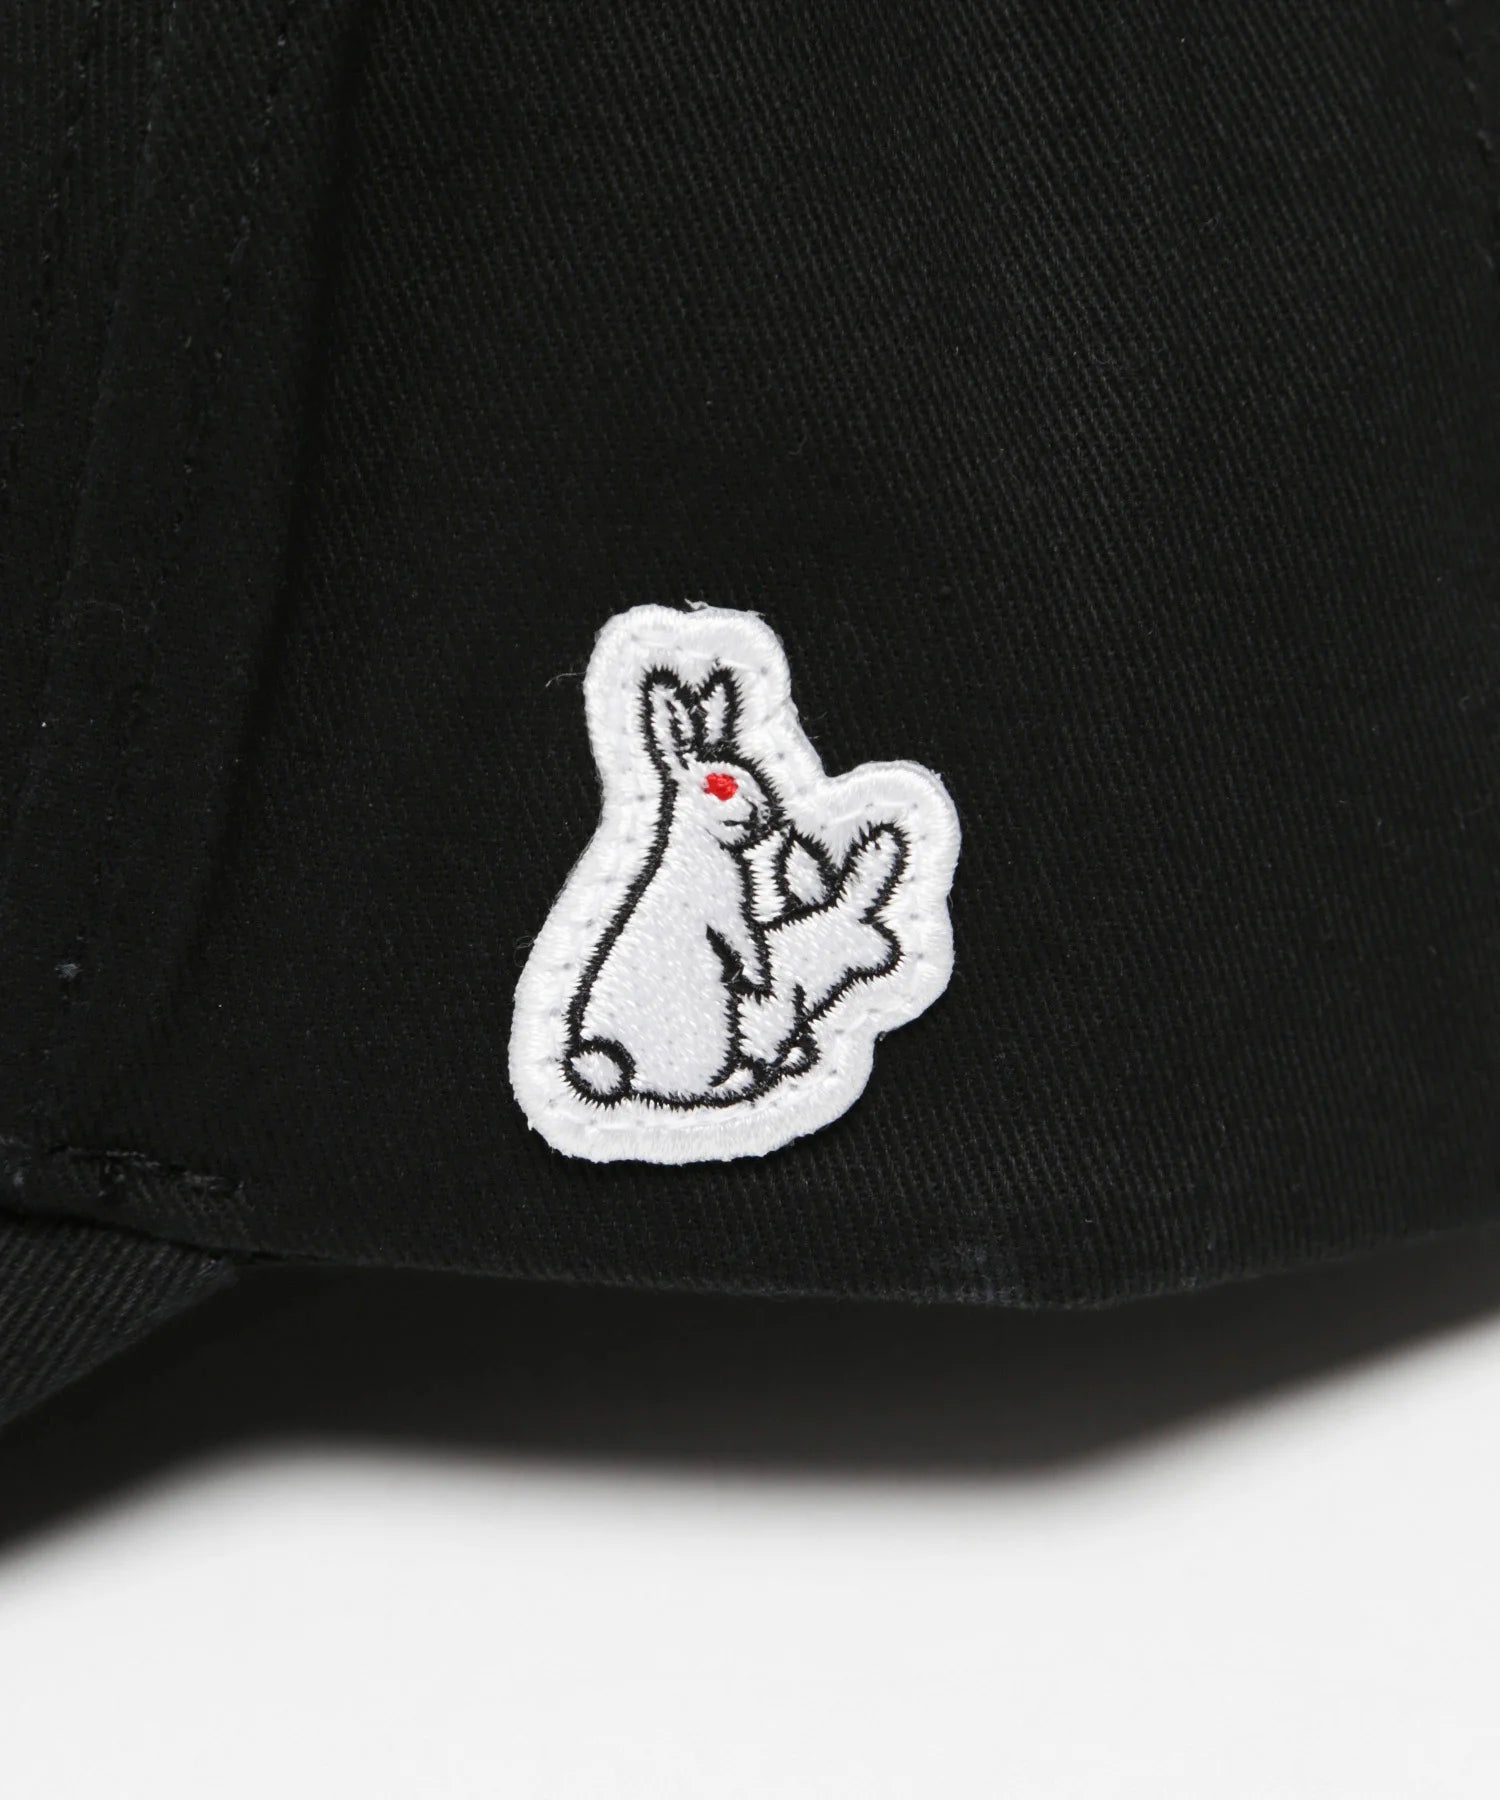 Player Logo Embroidery Six Panel Cap fra1324